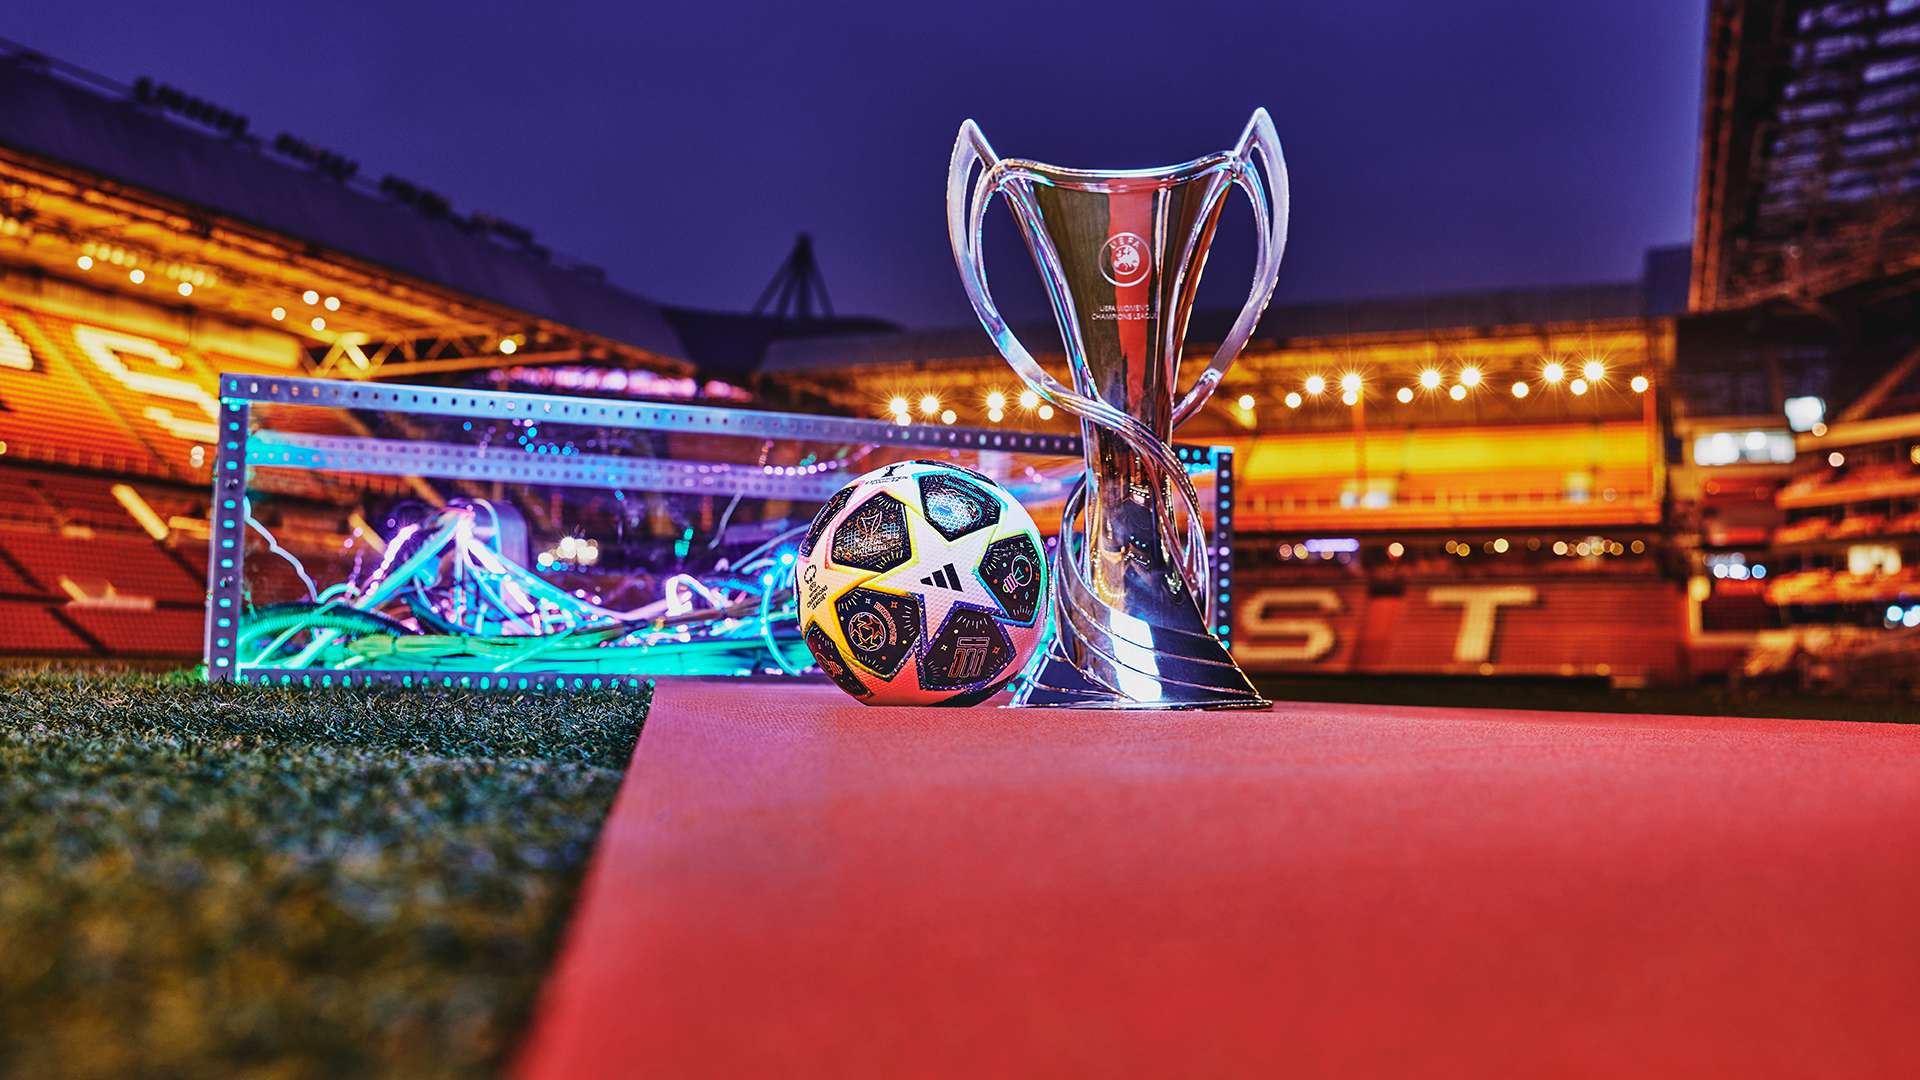 adidas UWCL Pro Ball Eindhoven - Trophy